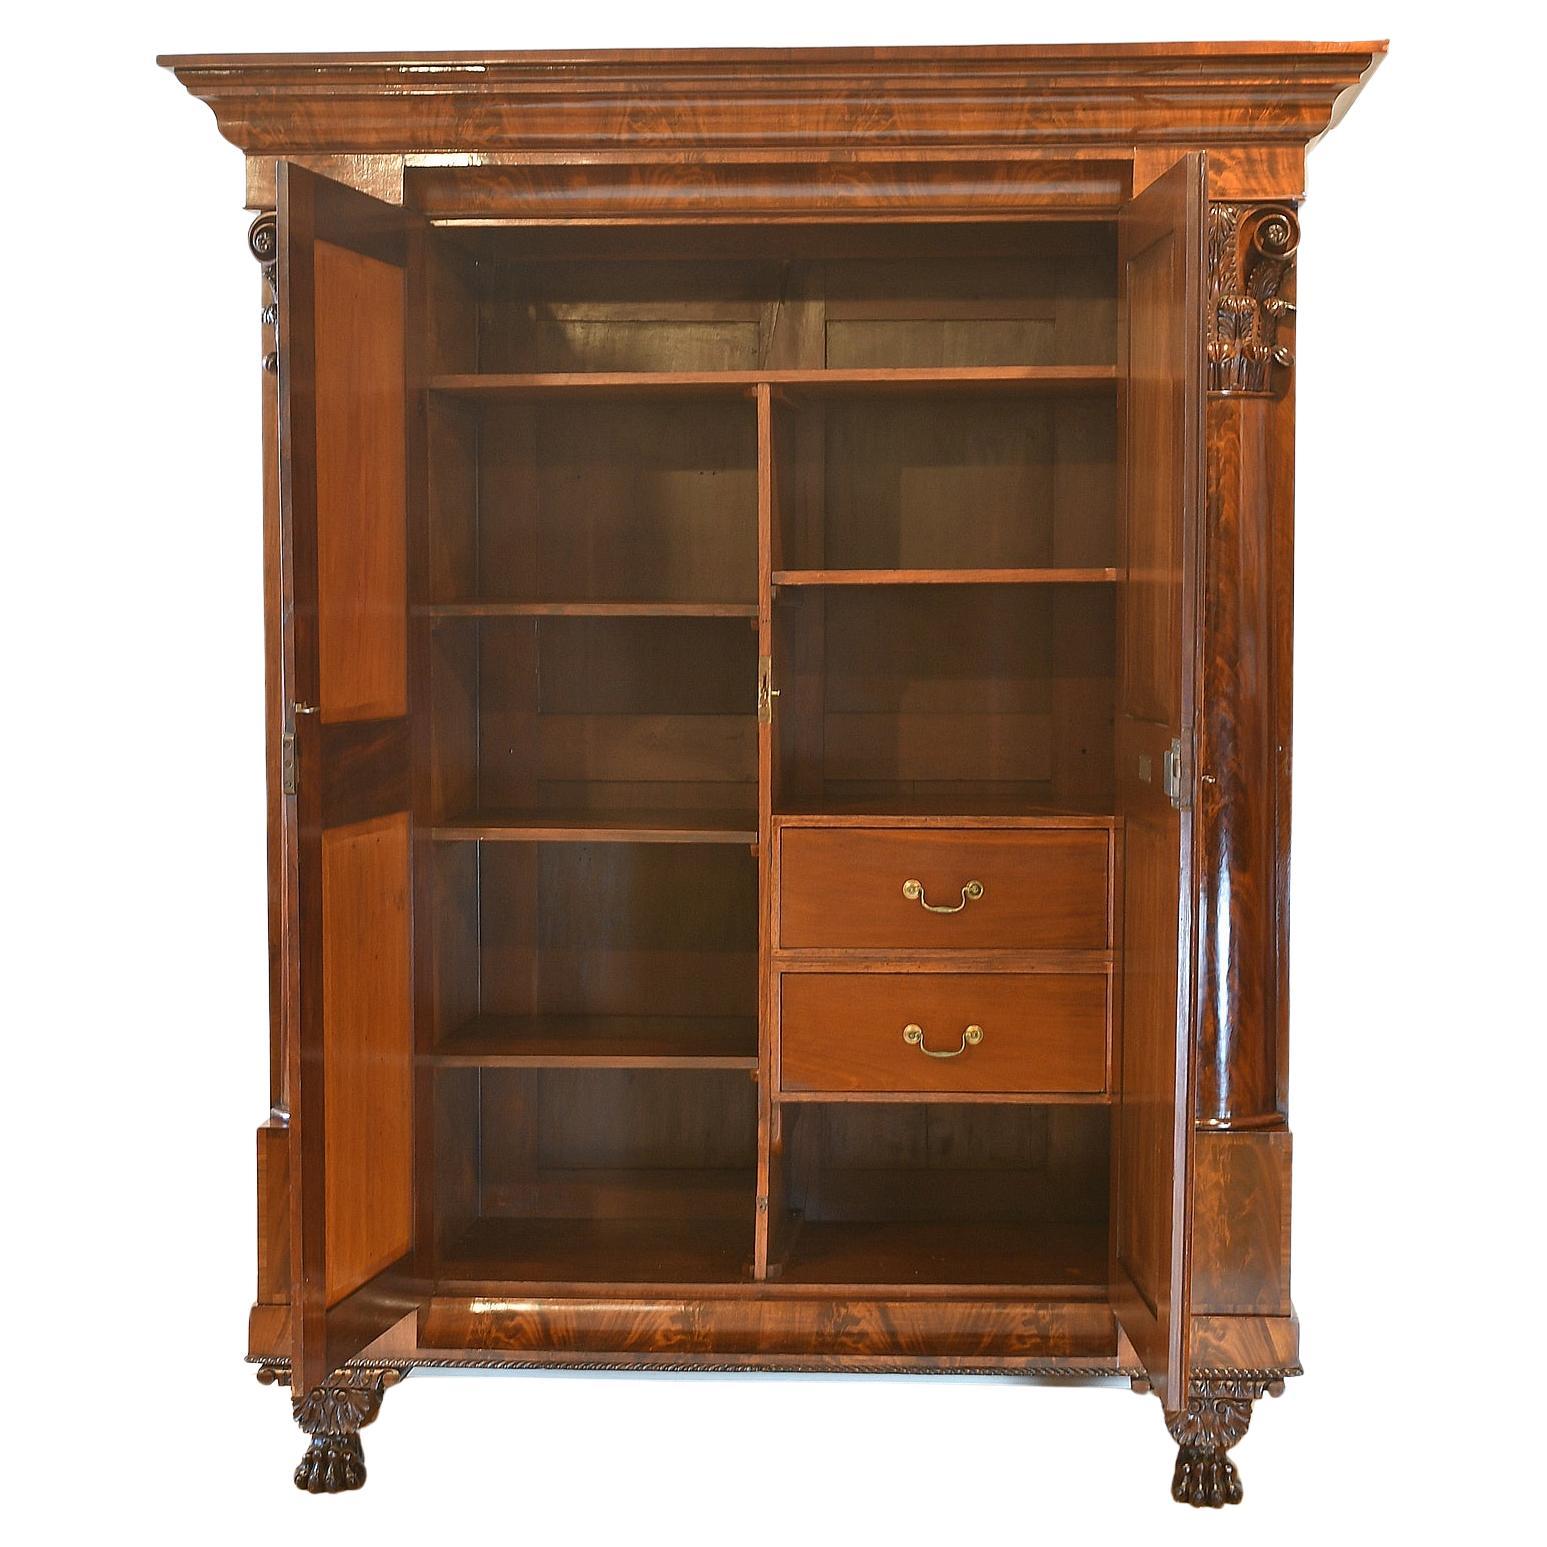 An exceptional American Federal wardrobe from Philadelphia in fine West Indies mahogany. Features split cylindrical columns with elaborate acanthus-carved Corinthian capitals flanking doors with book matched, crotch-mahogany panels. The stepped